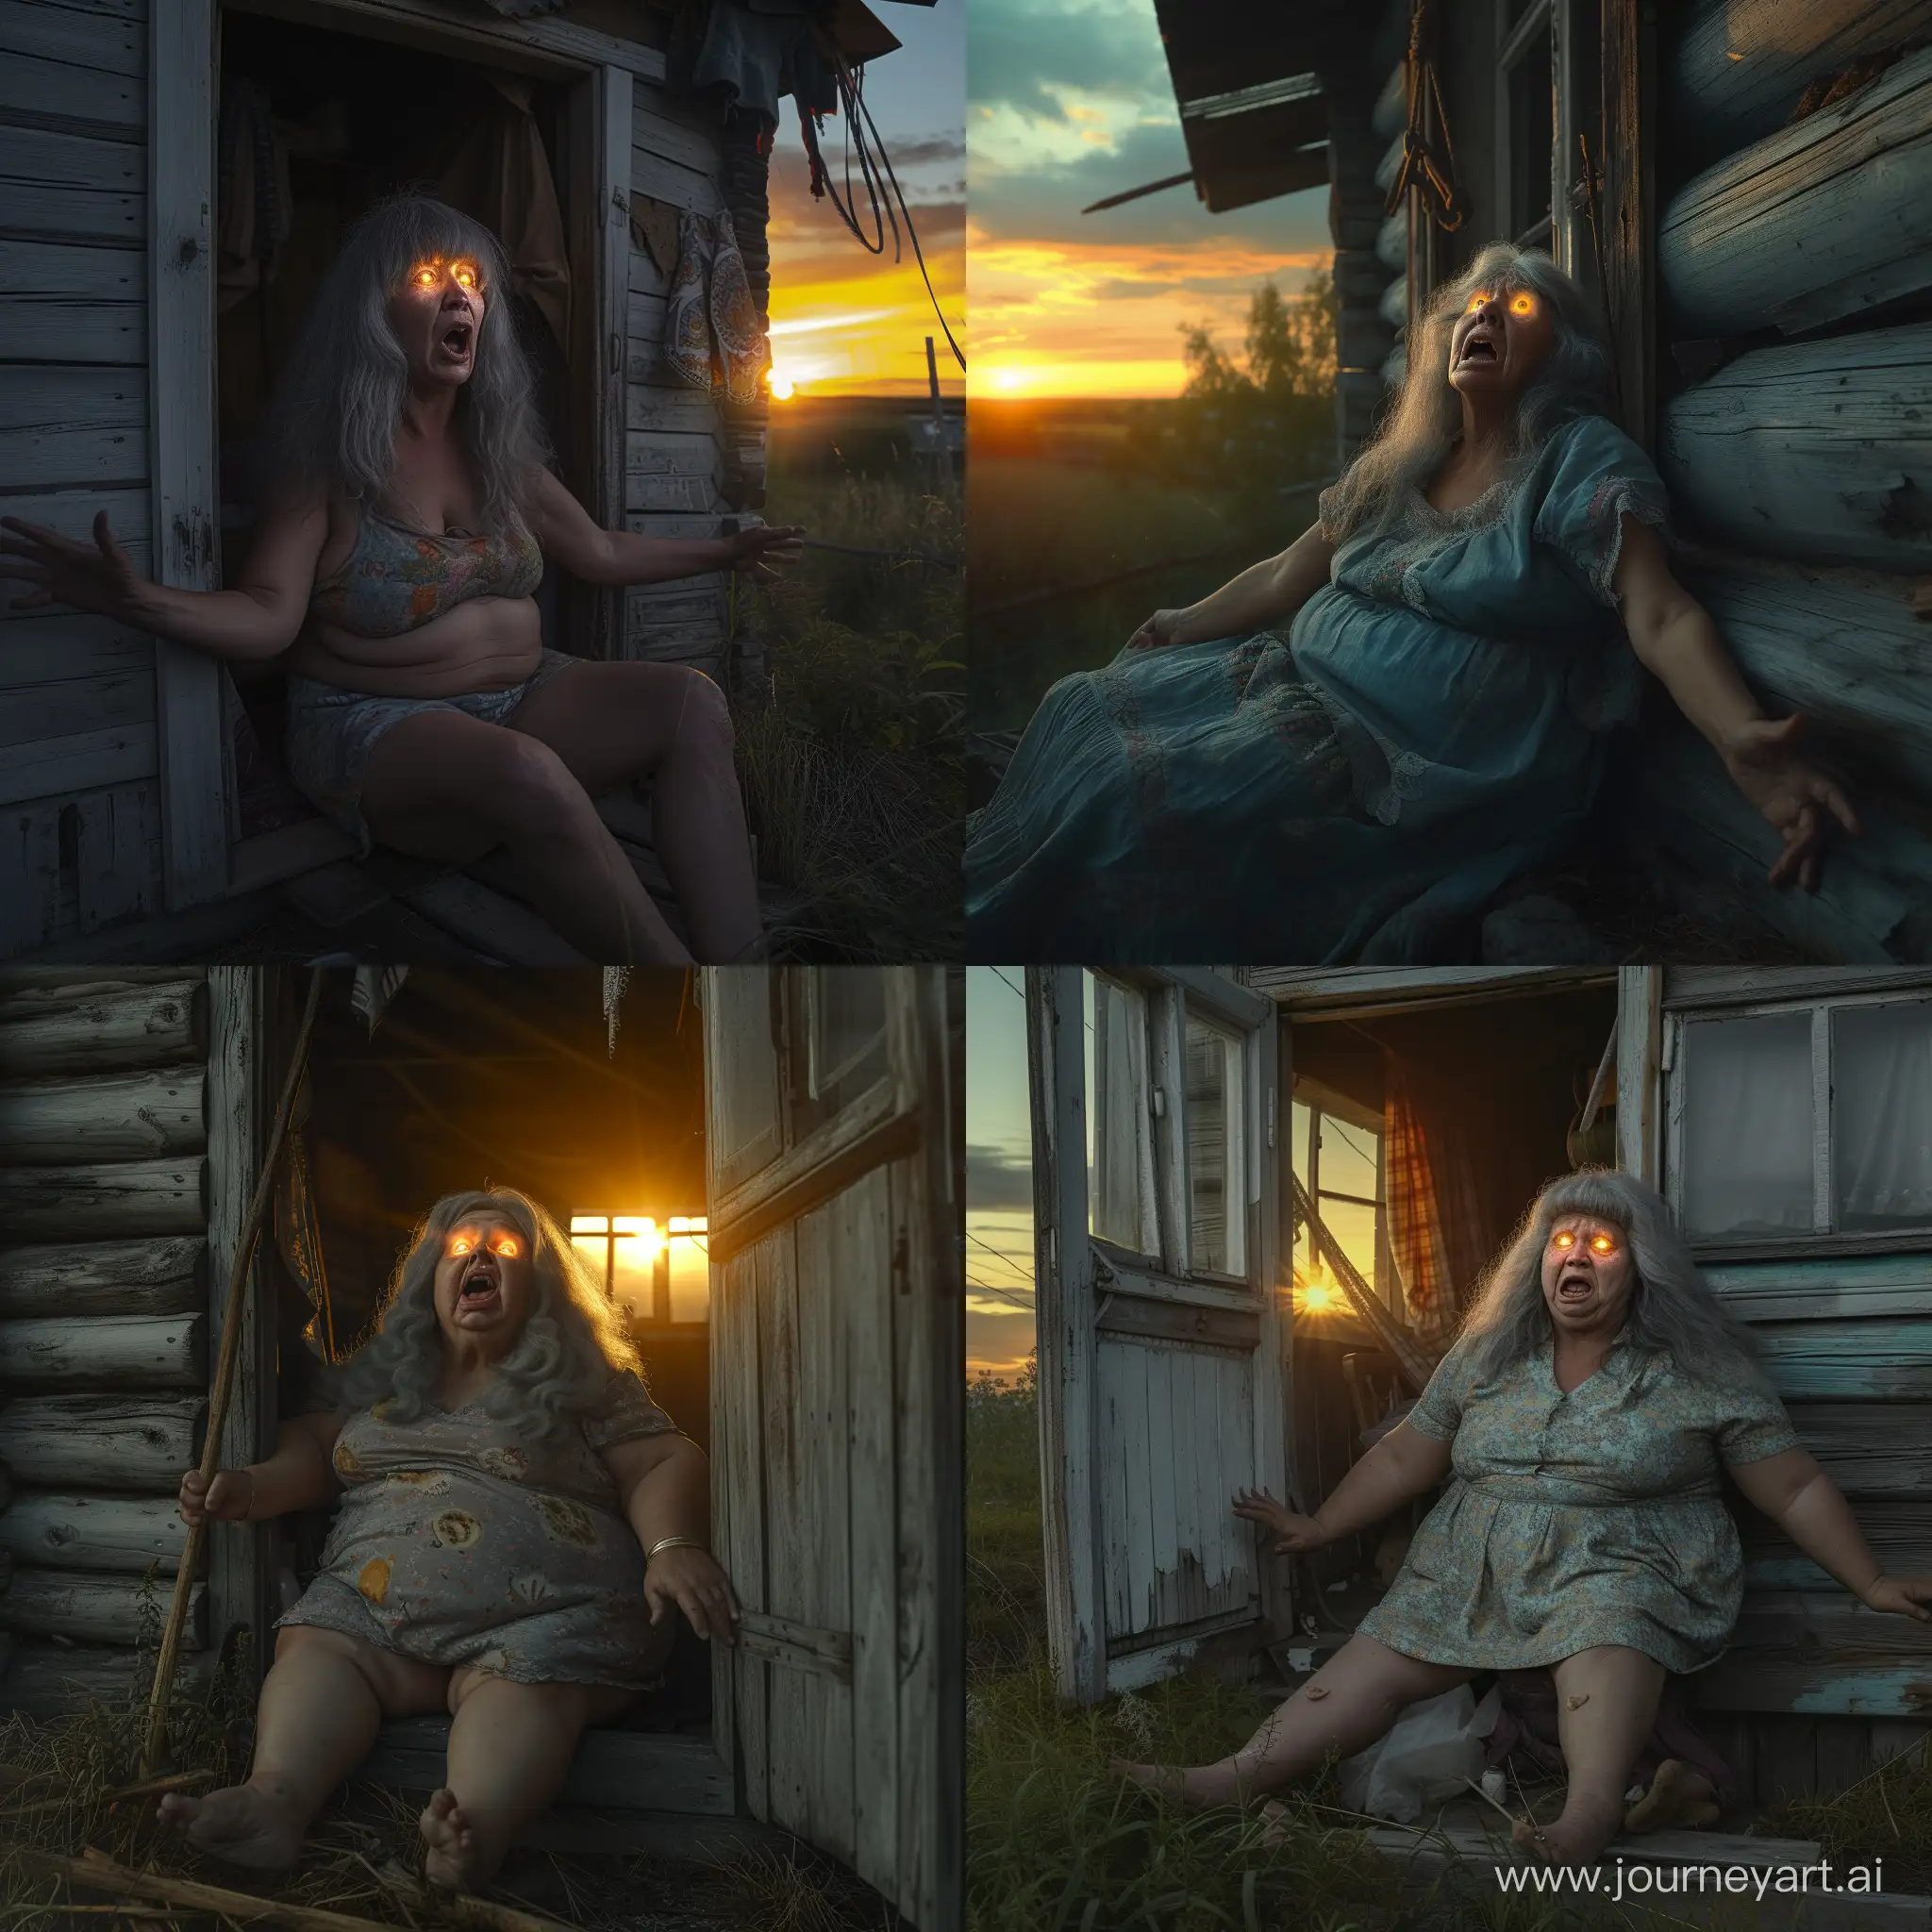 Enchanting-HyperRealistic-Russian-Hut-Interior-at-Sunset-with-Mysterious-Woman